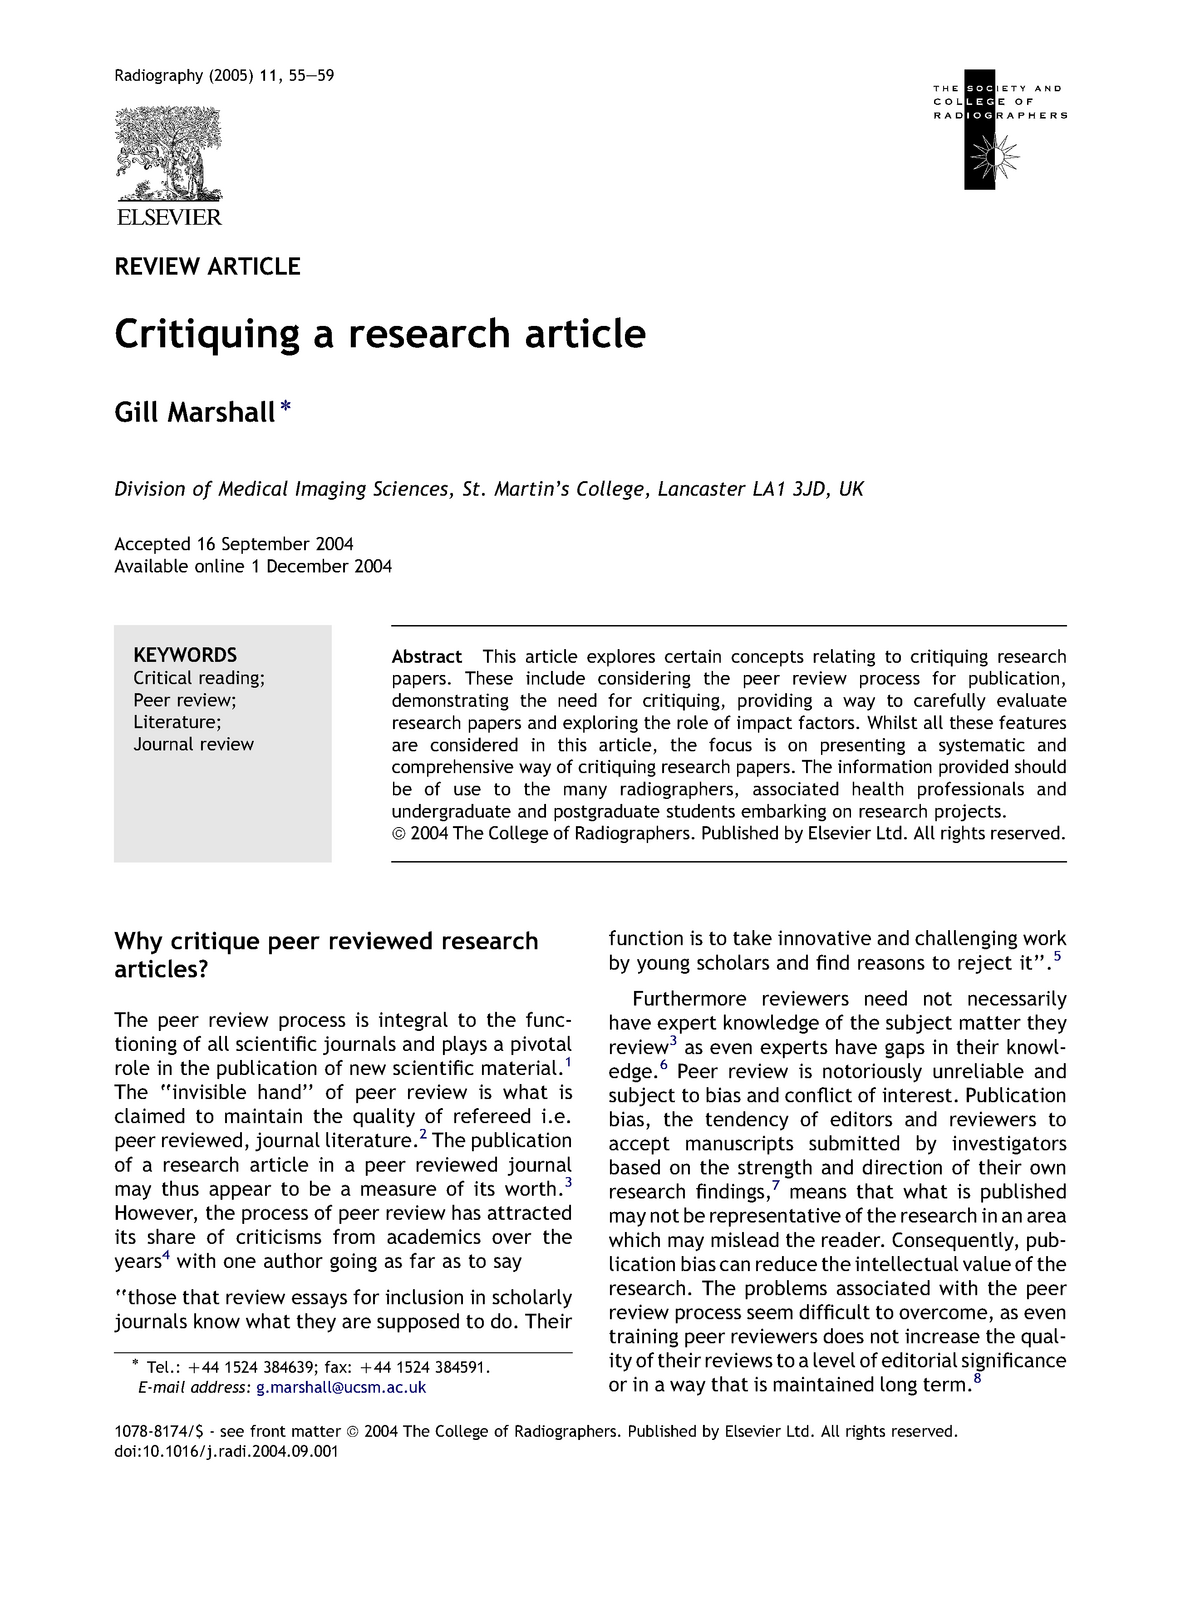 tips for critiquing a research article